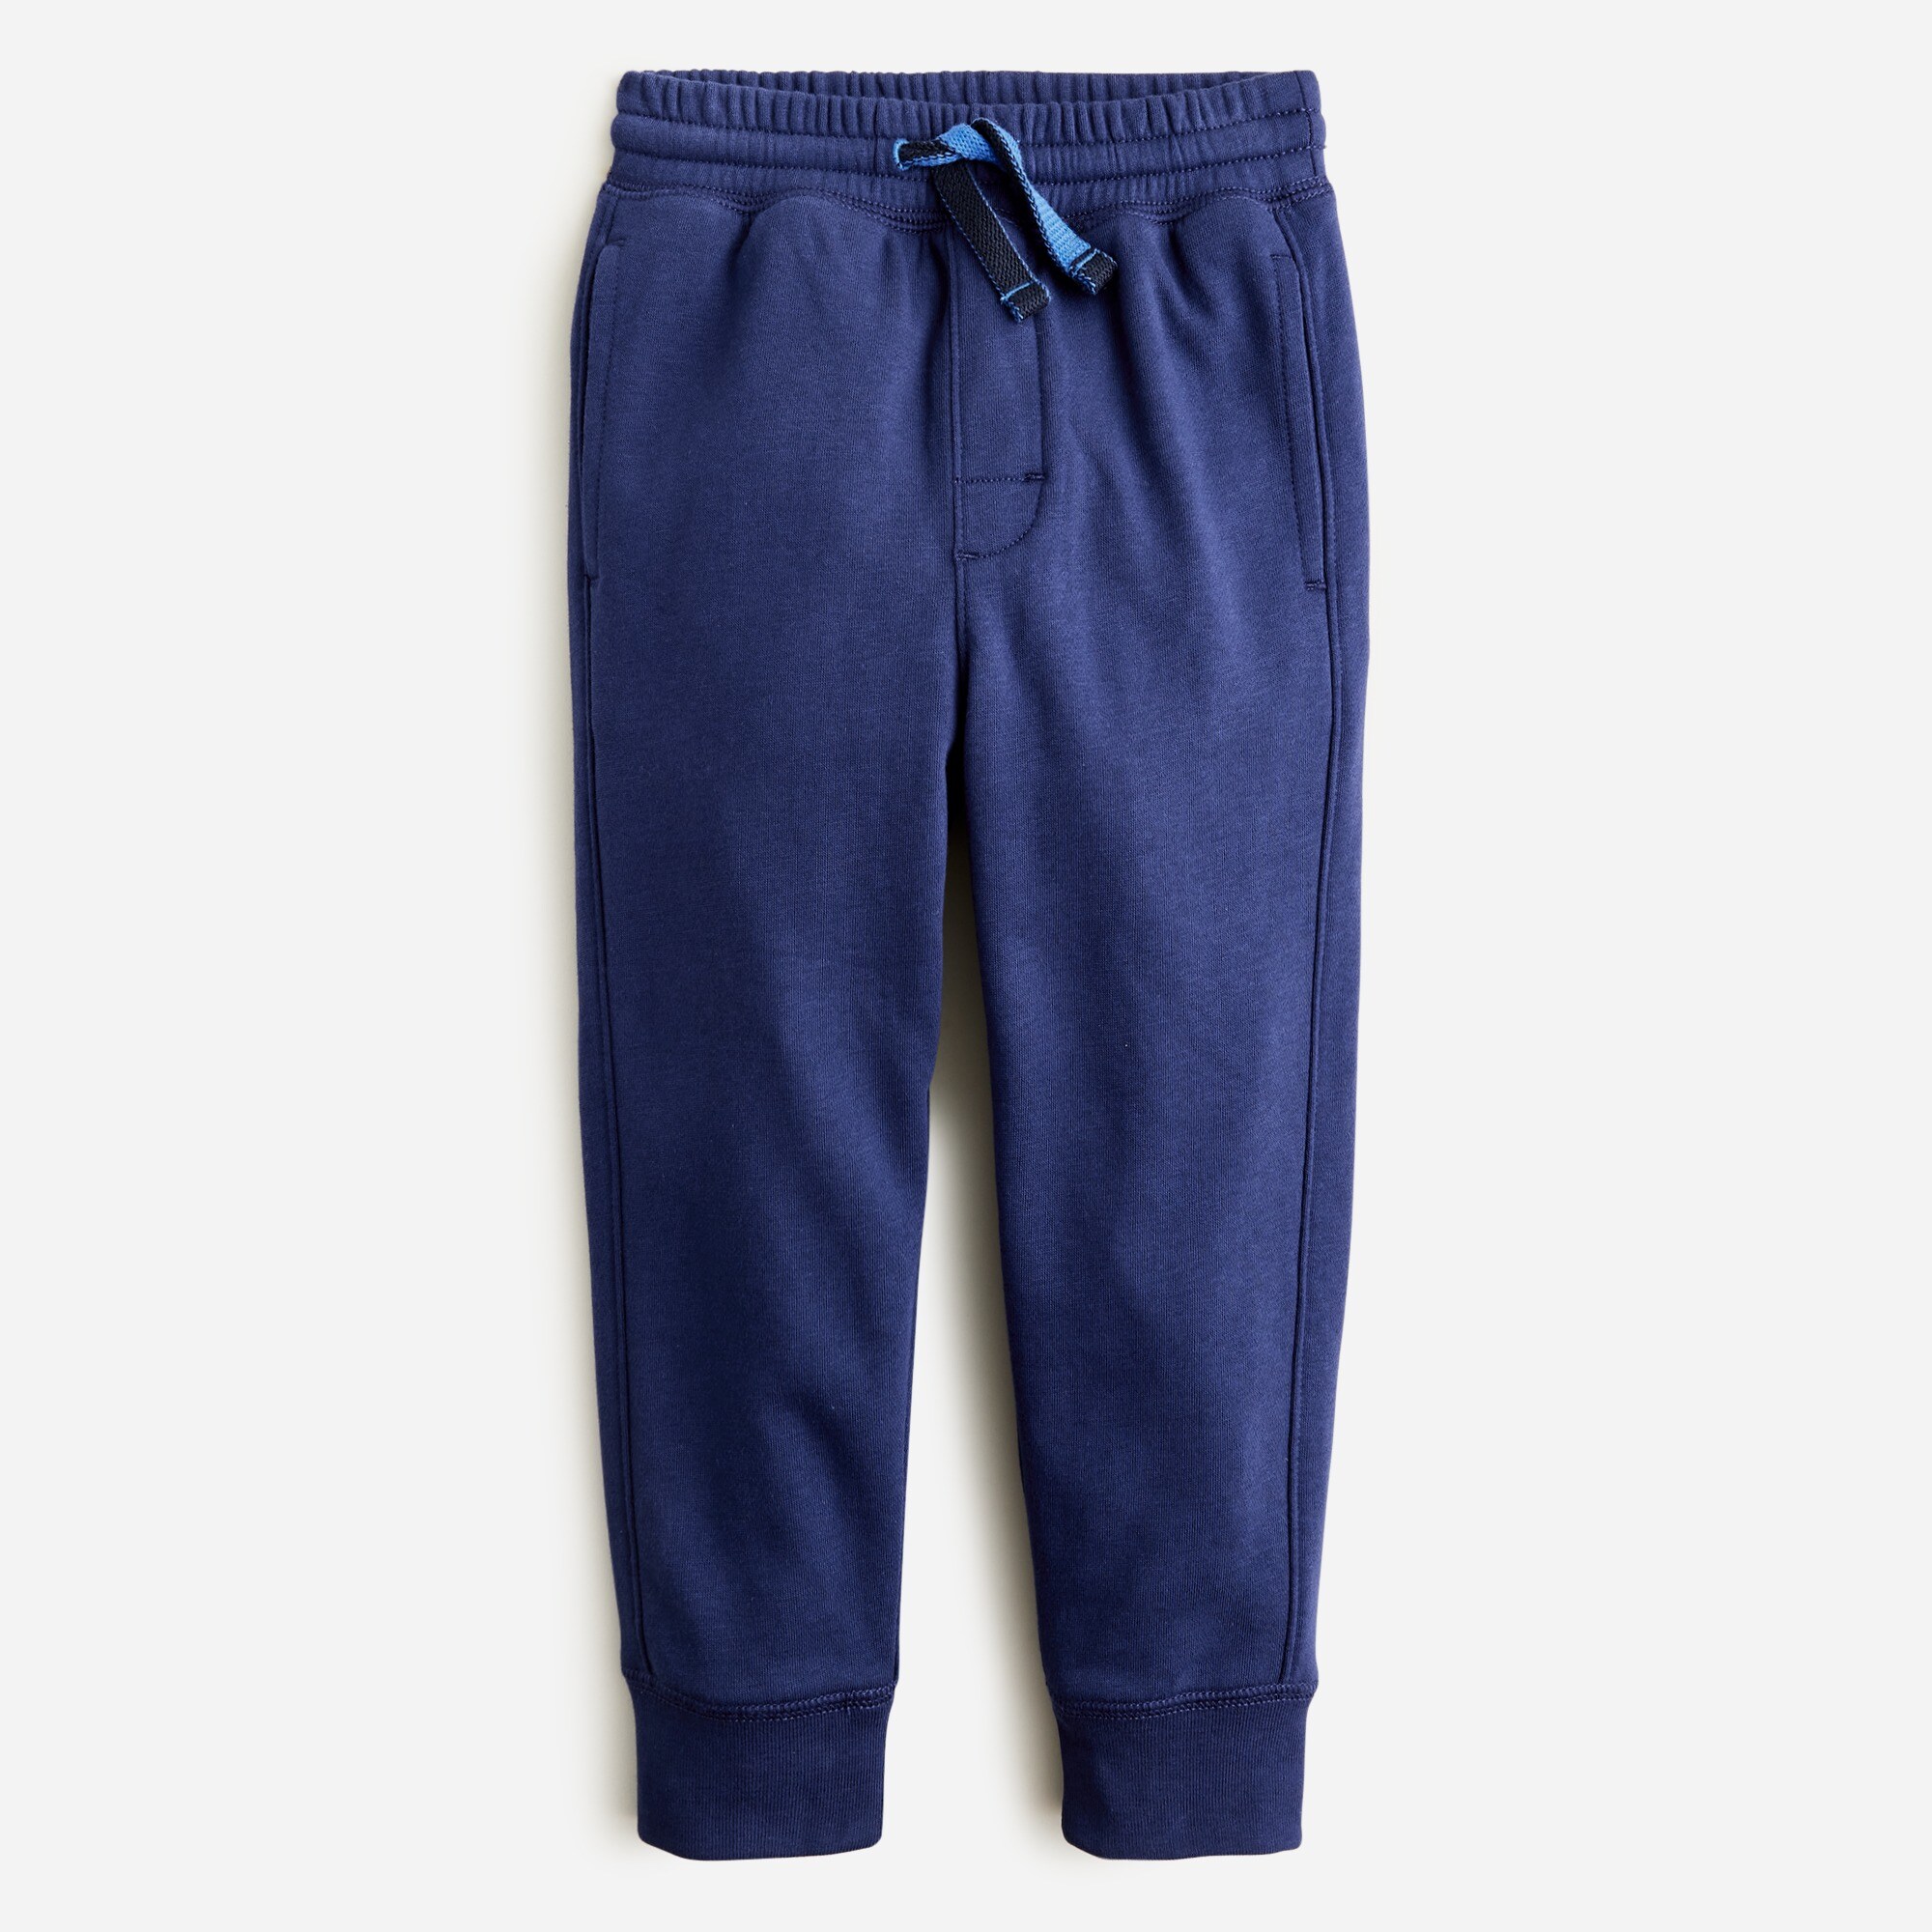  Kids' slim-slouchy jogger pant in terry